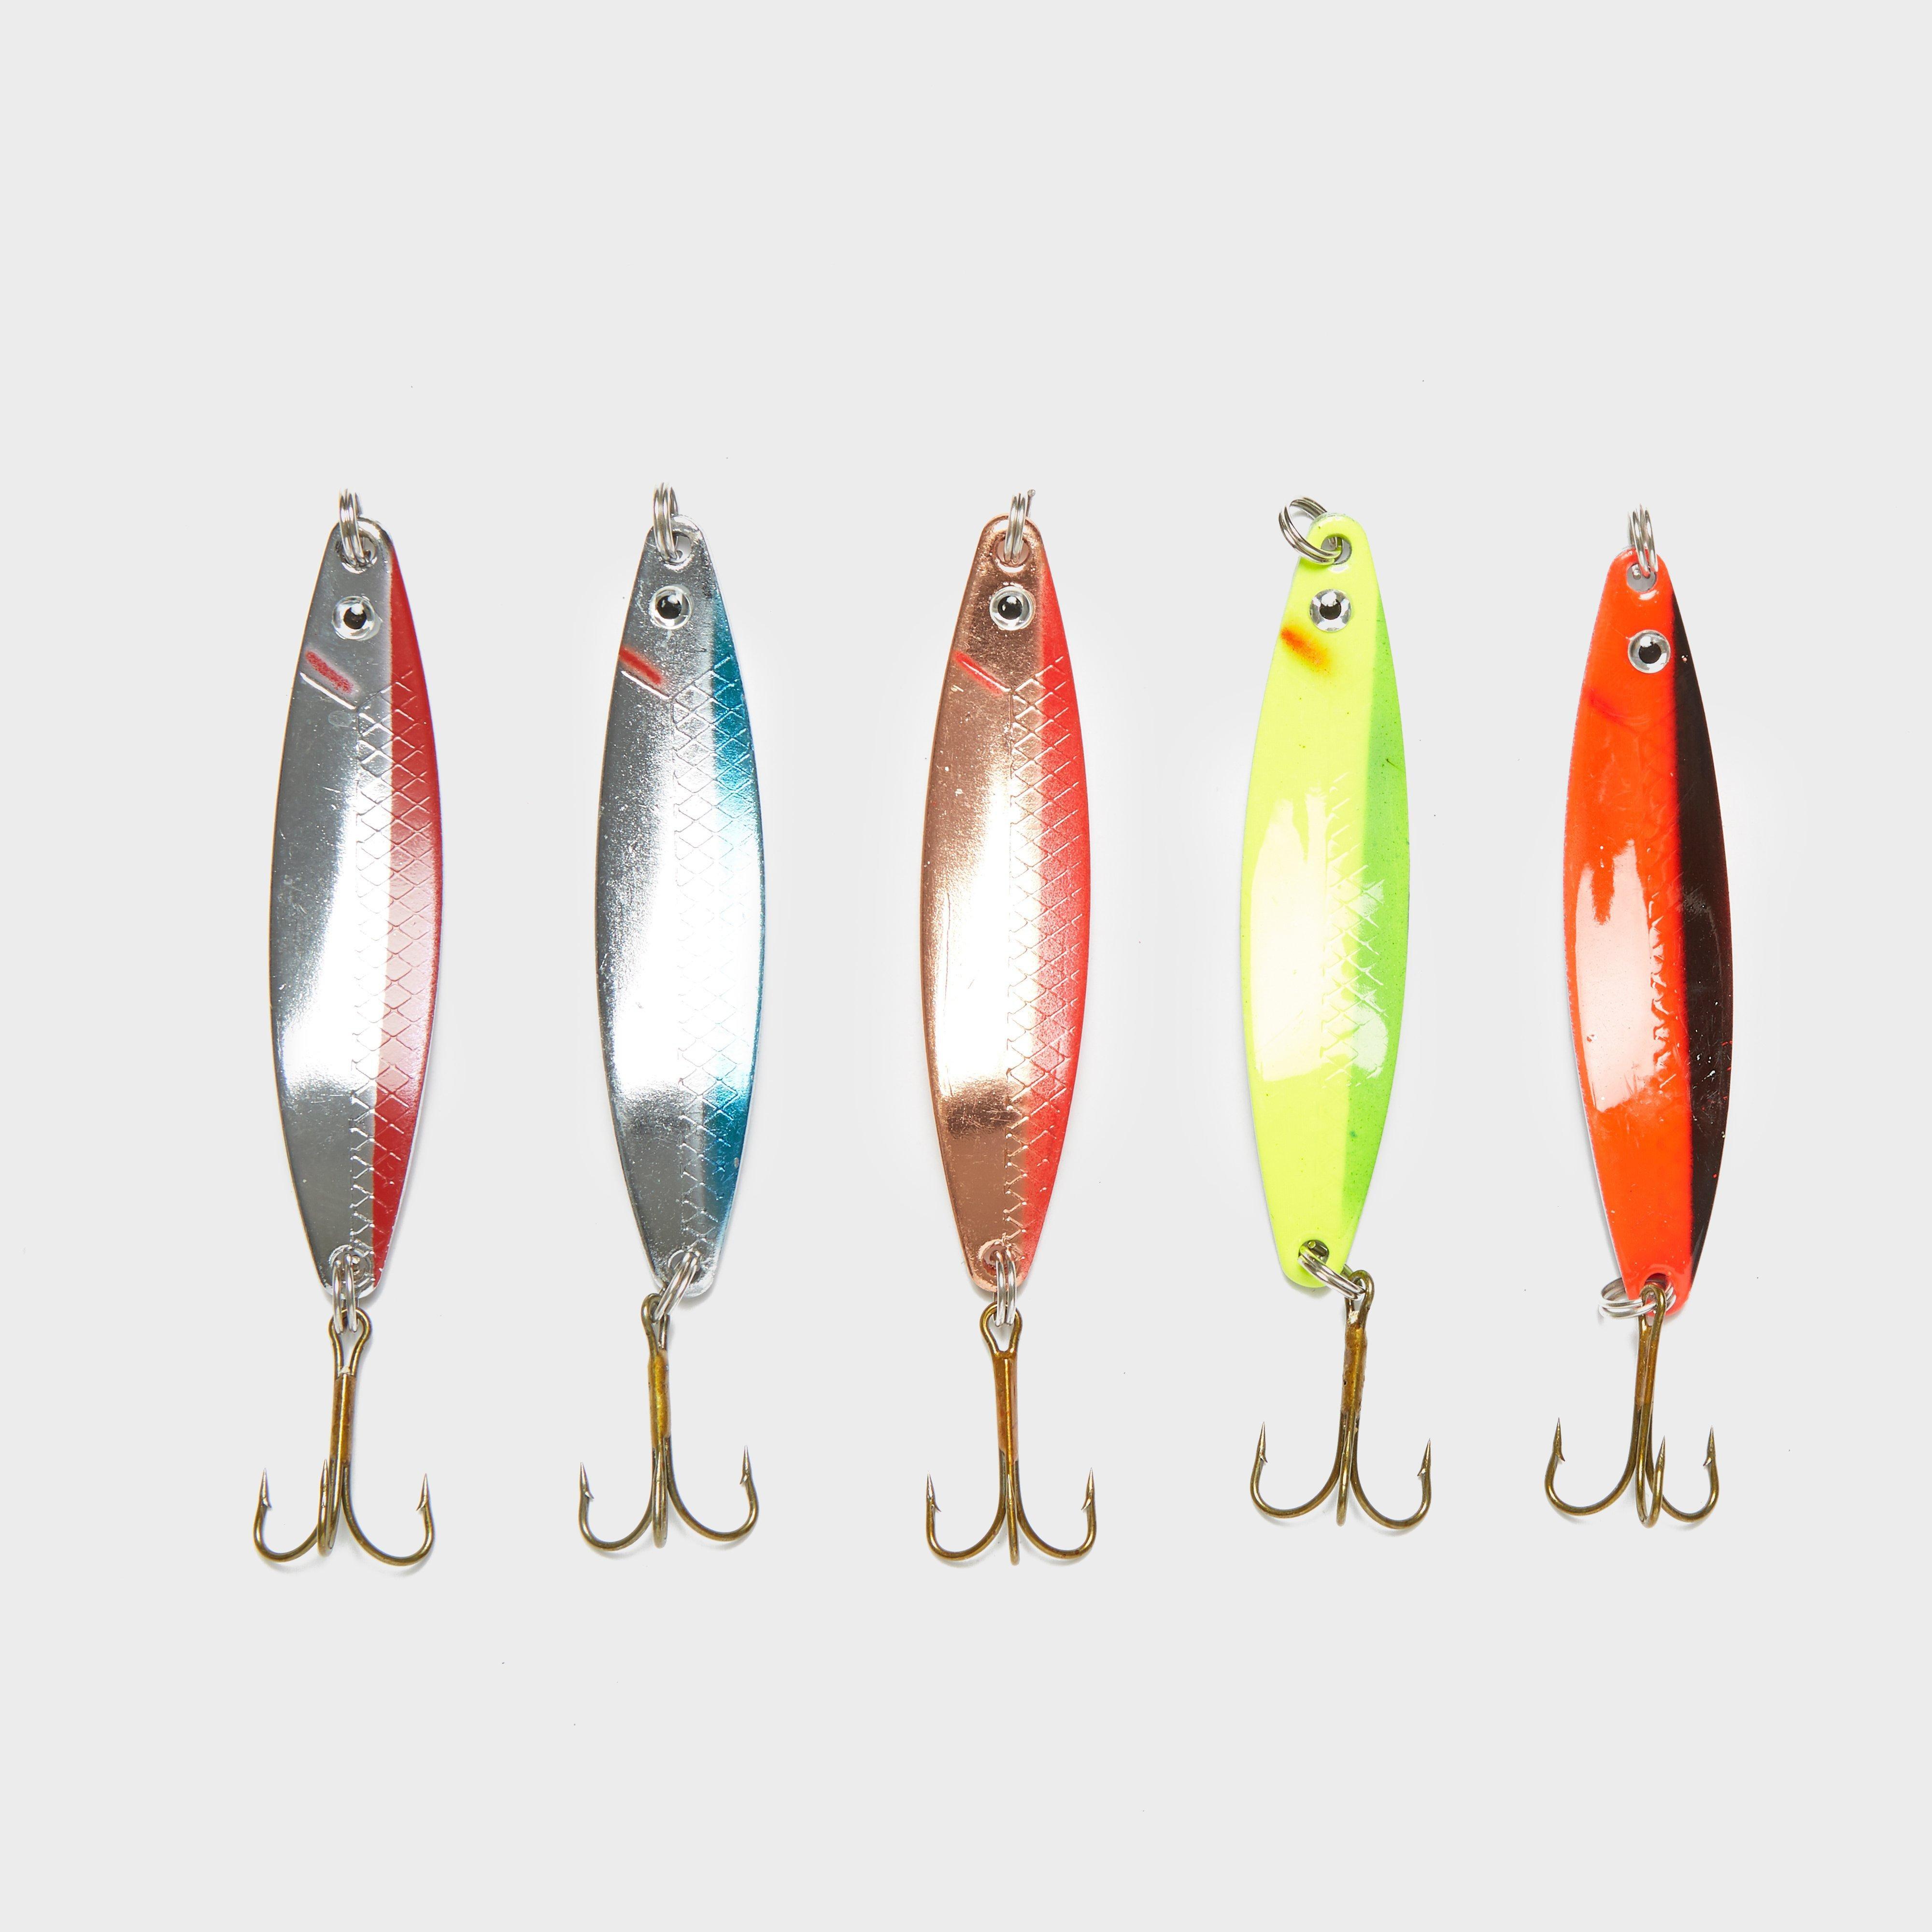 Ron Thompson Slim Lures 26g – 5 Pack Review